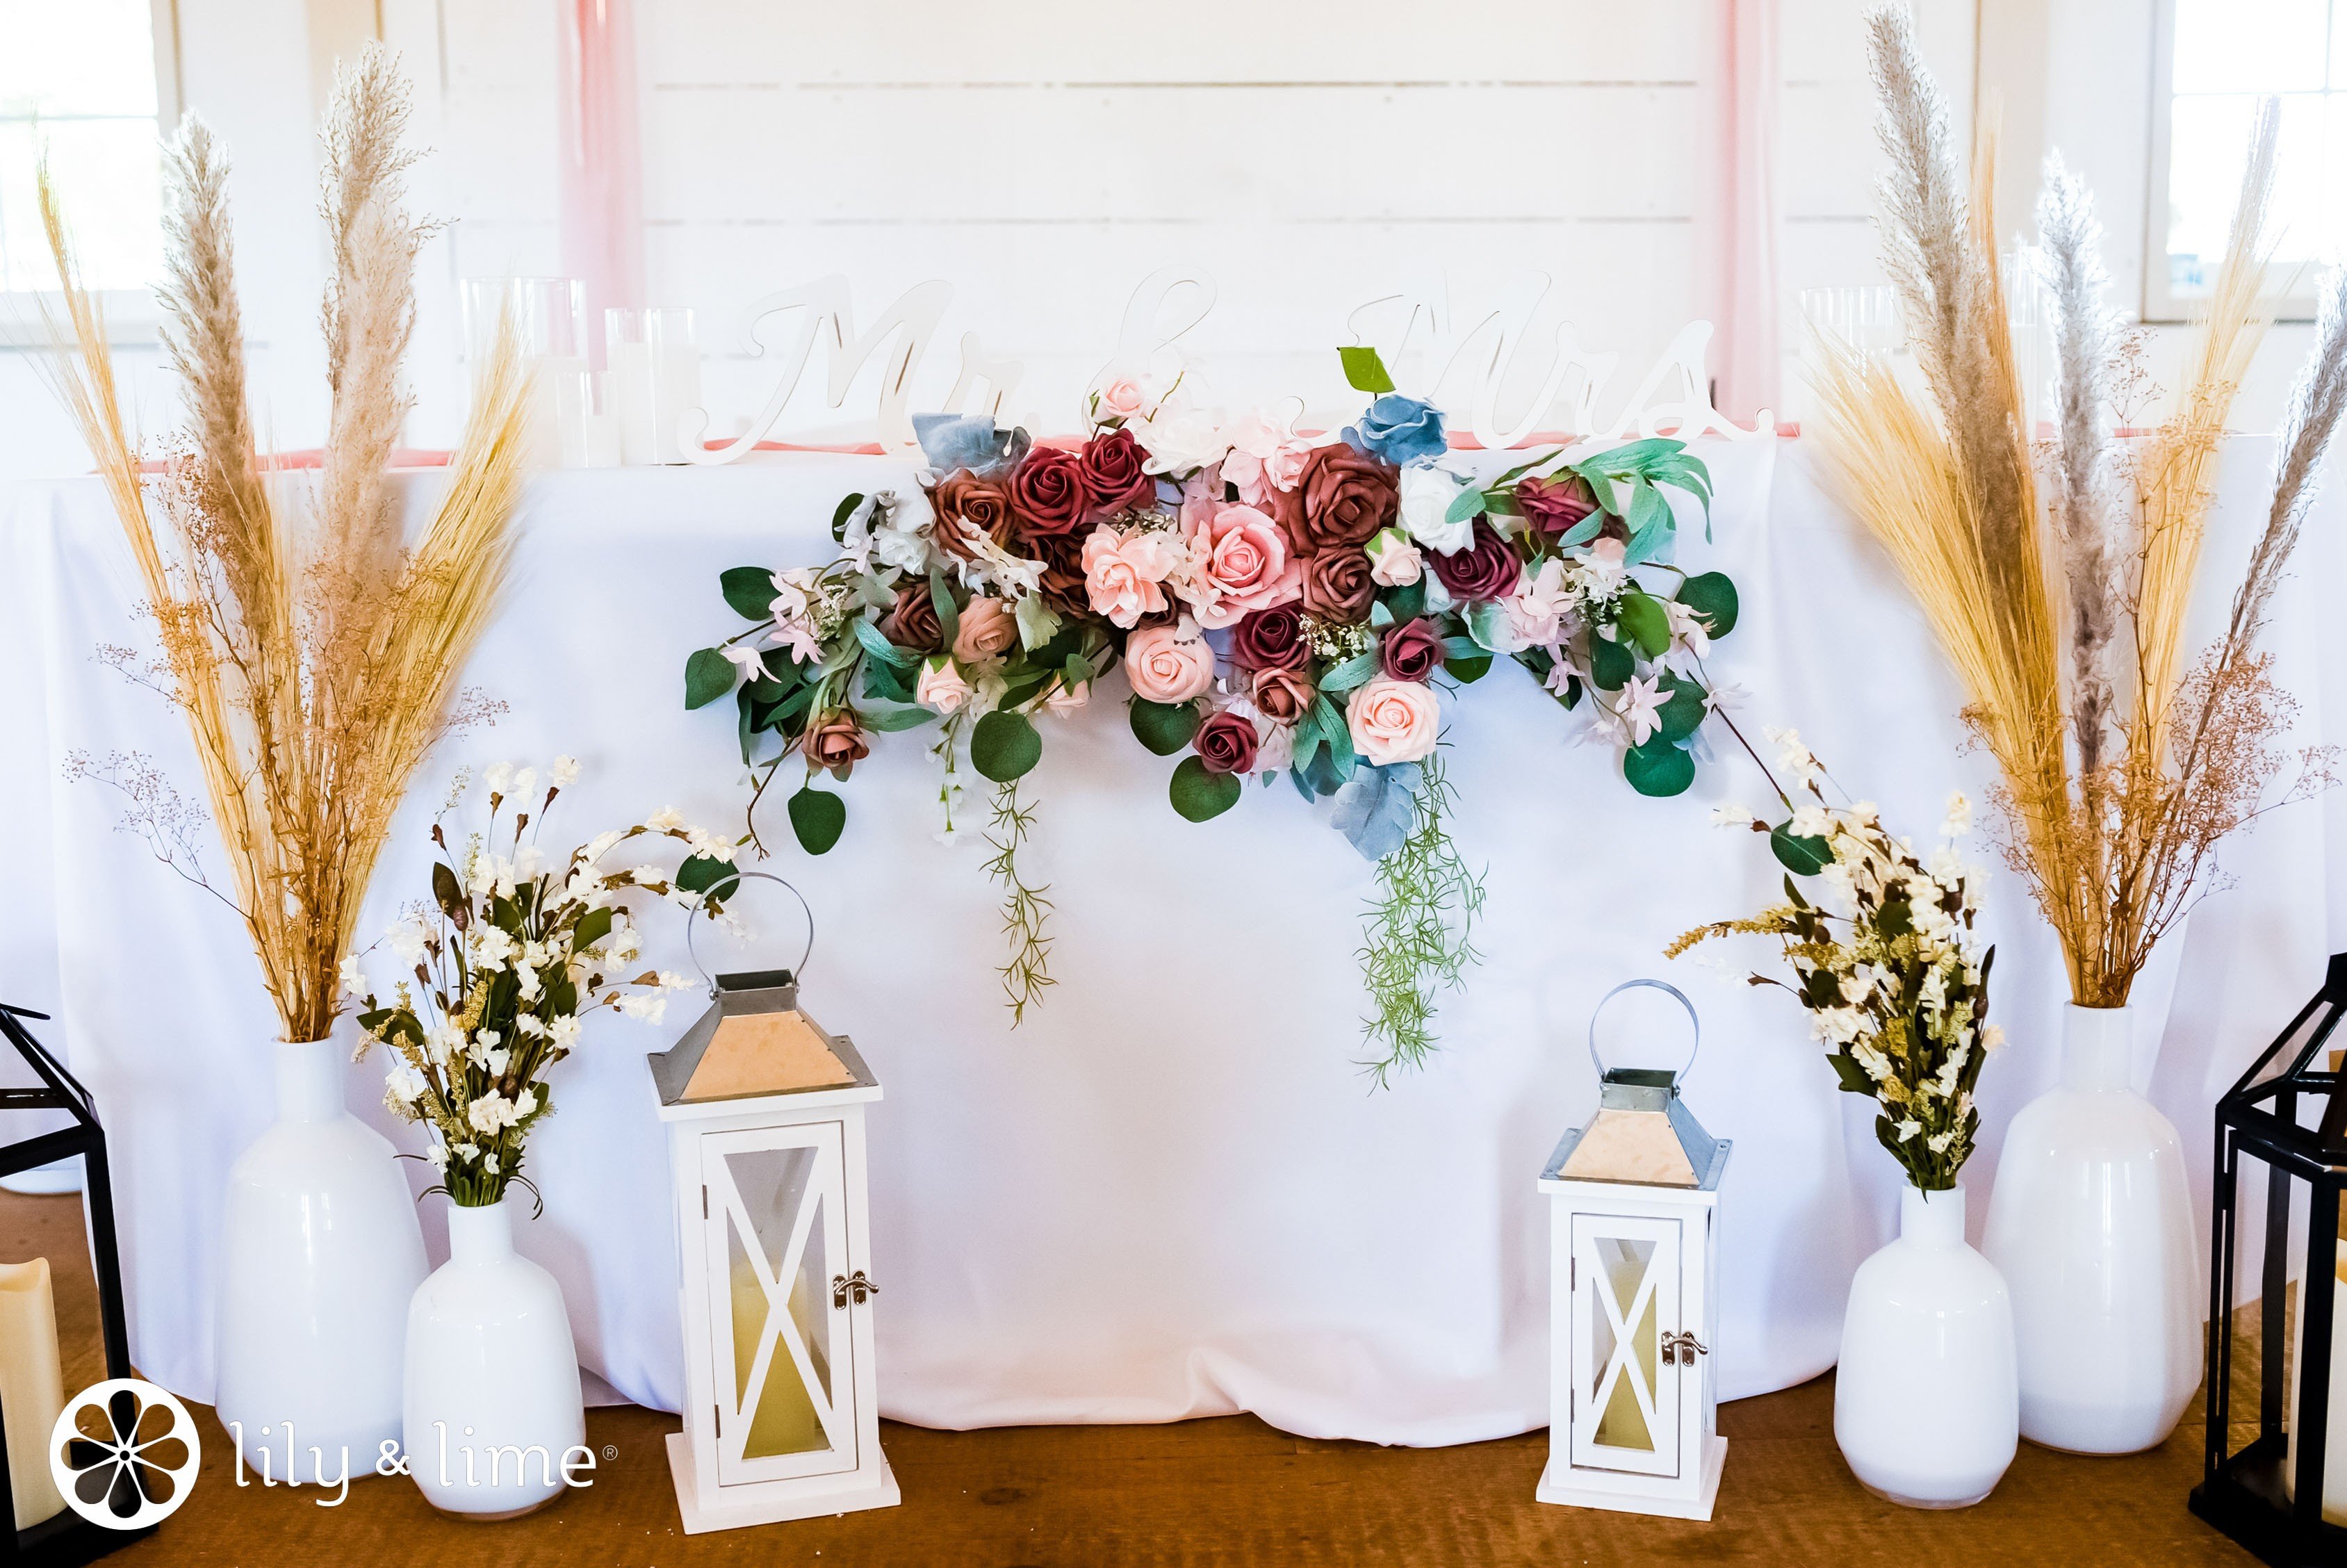 20+ Low-Cost Home Wedding Decor Ideas To Make Your Day Special